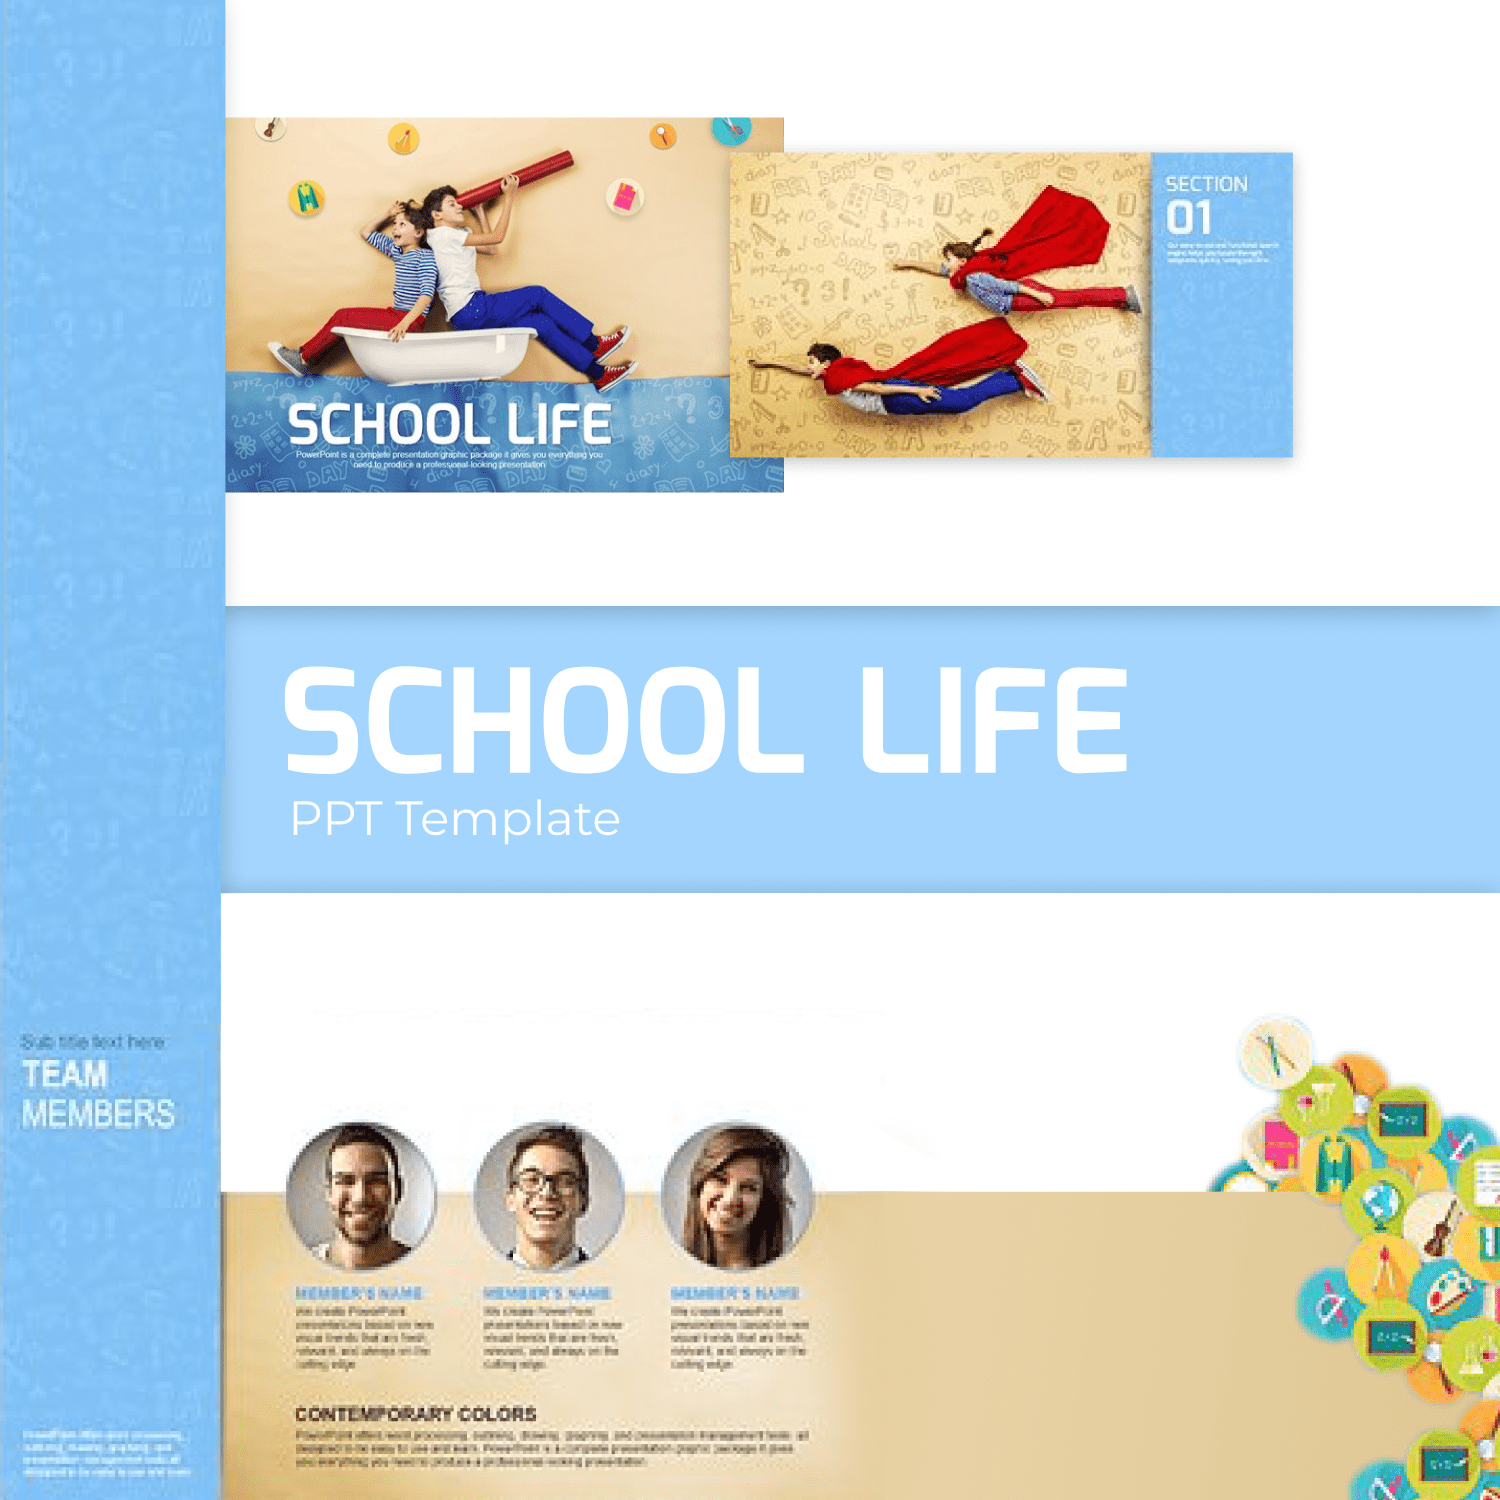 School Life PPT Template cover.